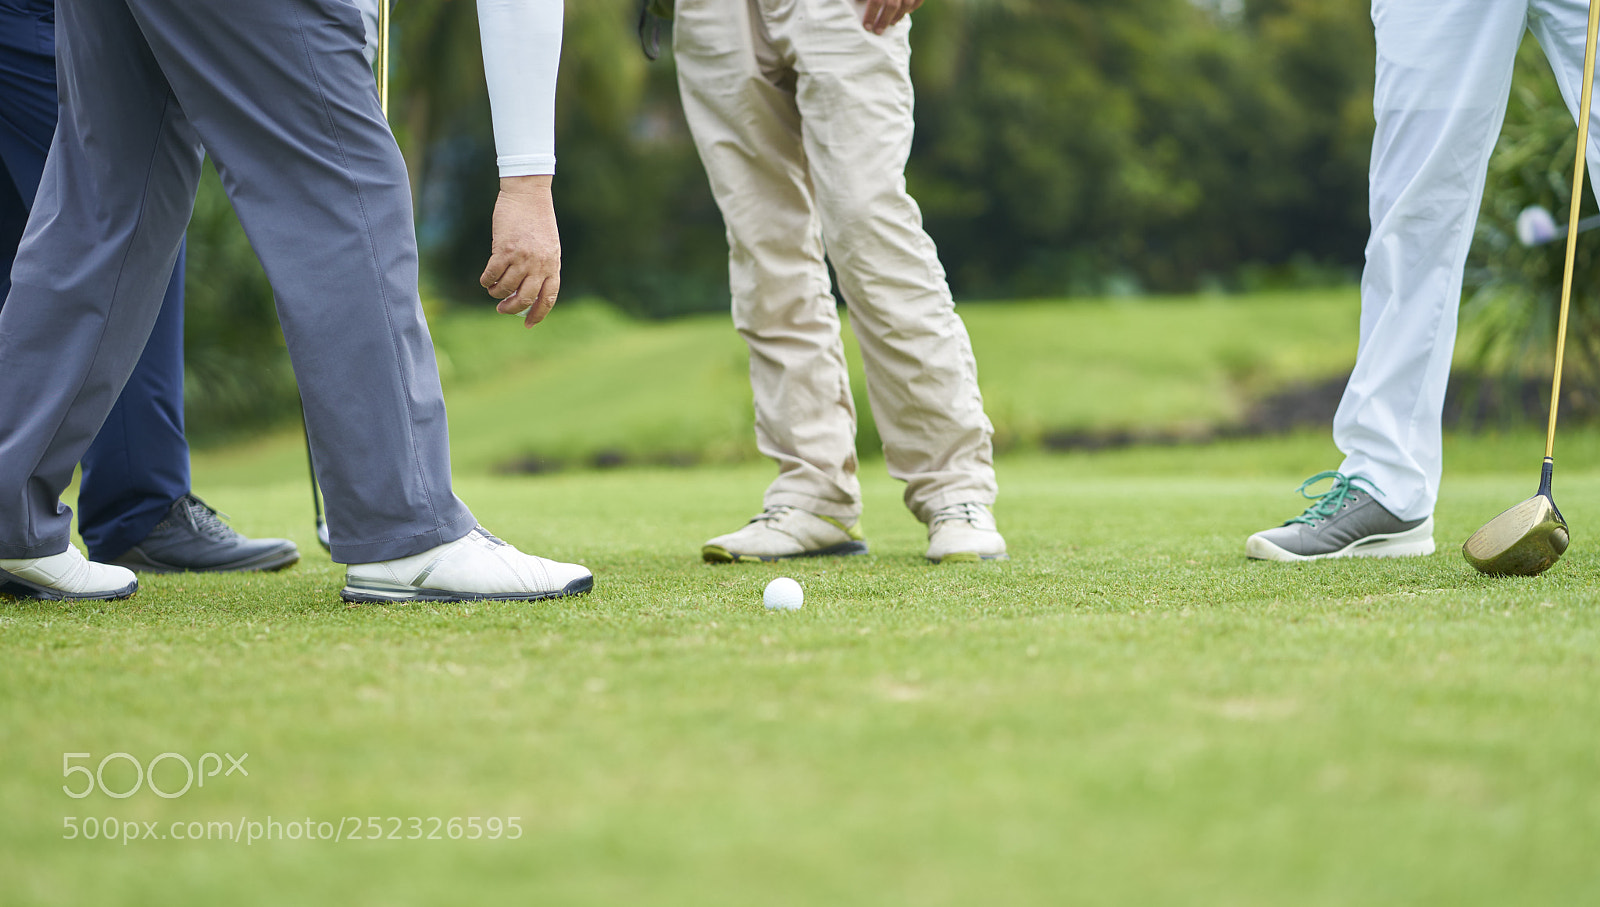 Sony a7 sample photo. Golfers playing golf outdoor photography